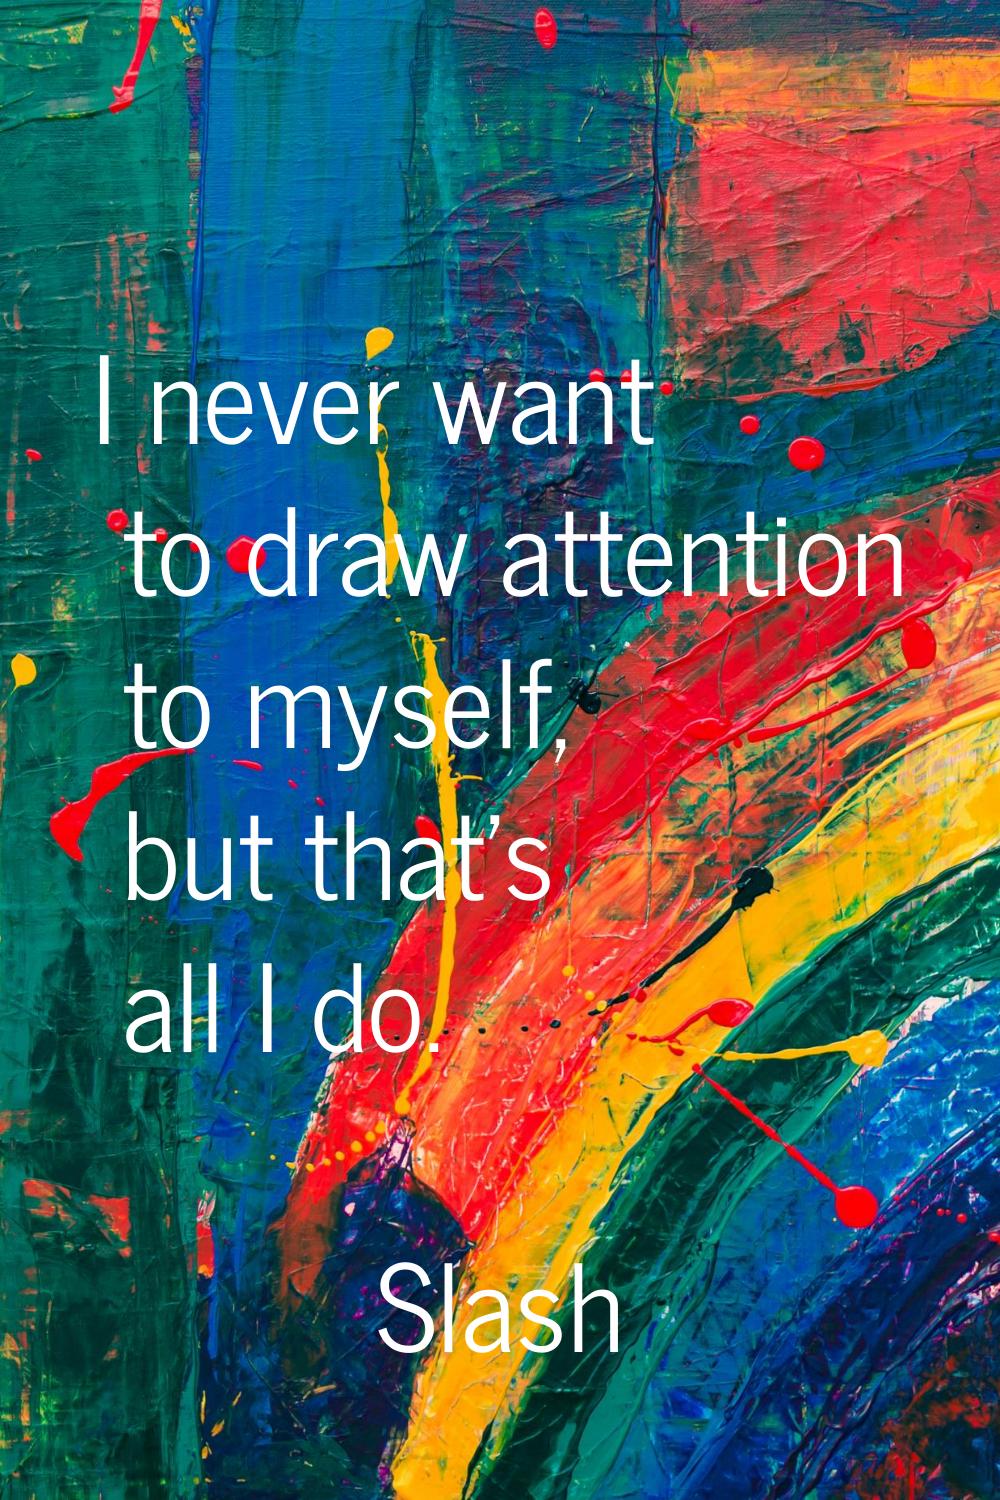 I never want to draw attention to myself, but that's all I do.